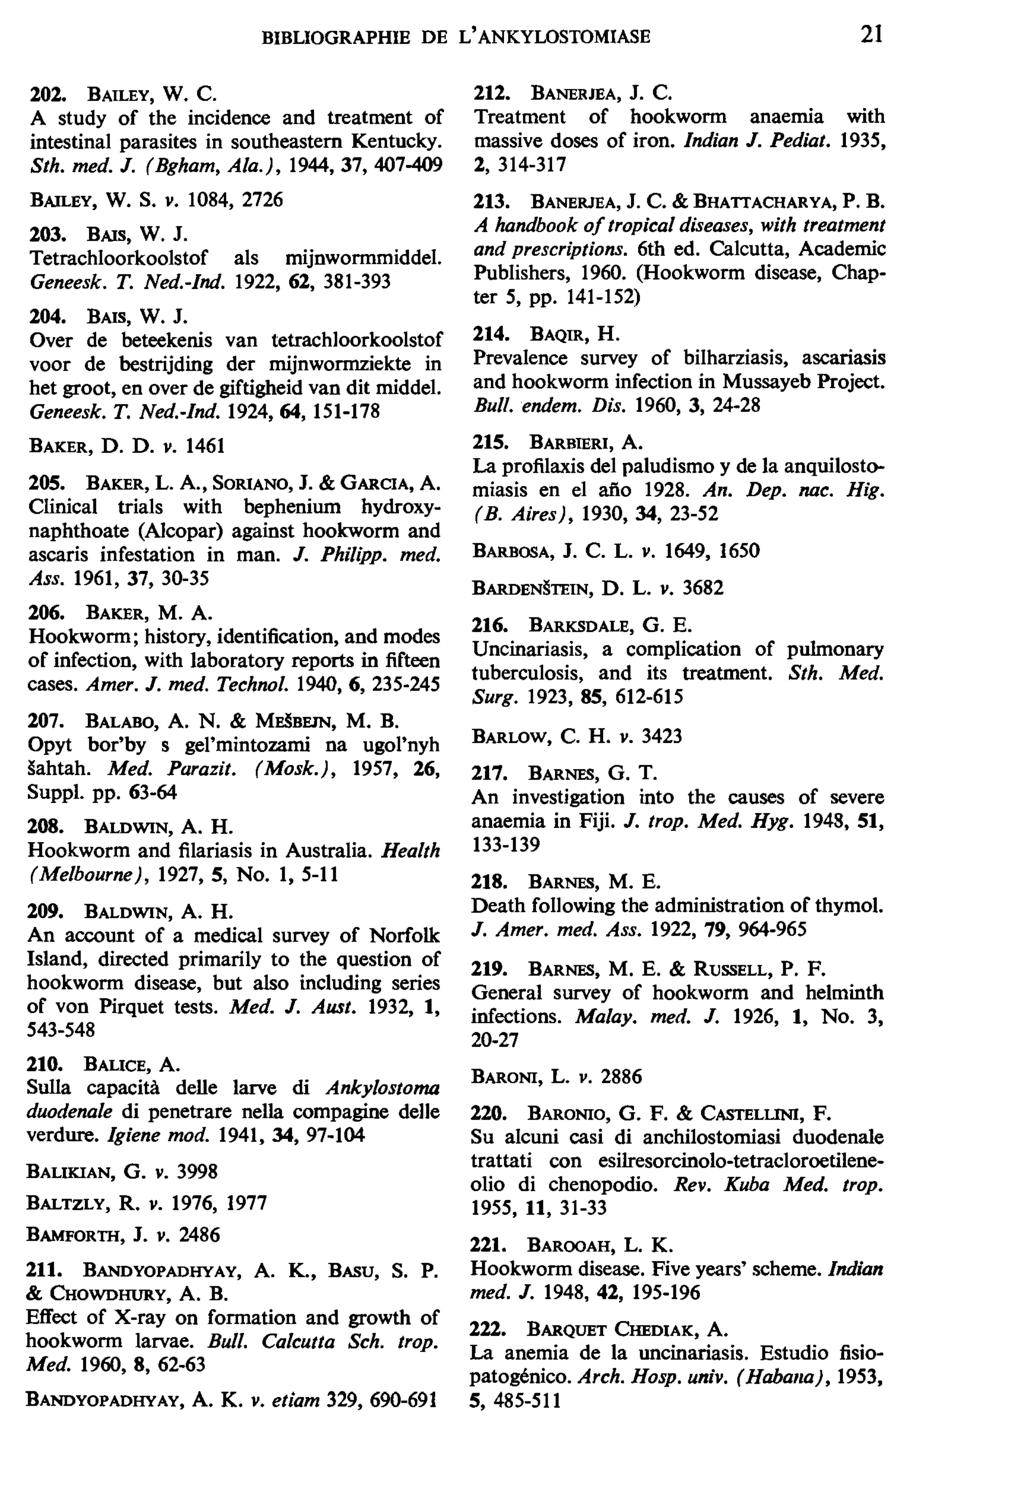 BIBLIOGRAPHIE DE L' ANKYLOSTOMIASE 21 202. BAILEY, W. C. A study of the incidence and treatment of intestinal parasites in southeastern Kentucky. Sth. med. J. (Bgham, Ala.), 1944,37,407-409 BAILEY, W.